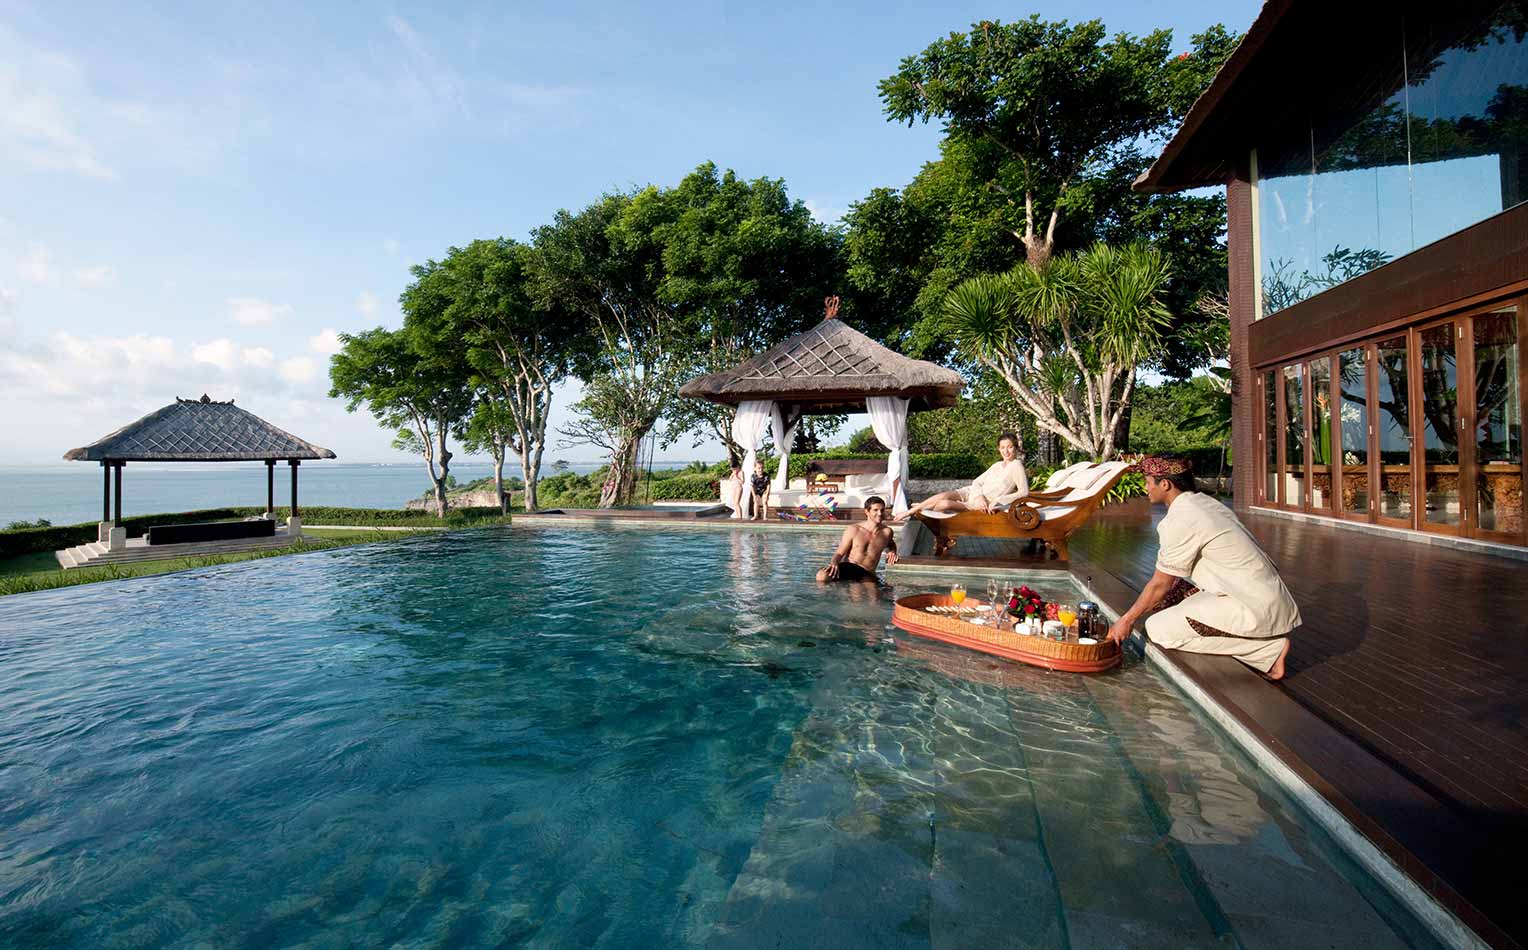 Ayana resort and spa bali review: what to really expect if you stay
ayana resort and spa bali – oyster.com